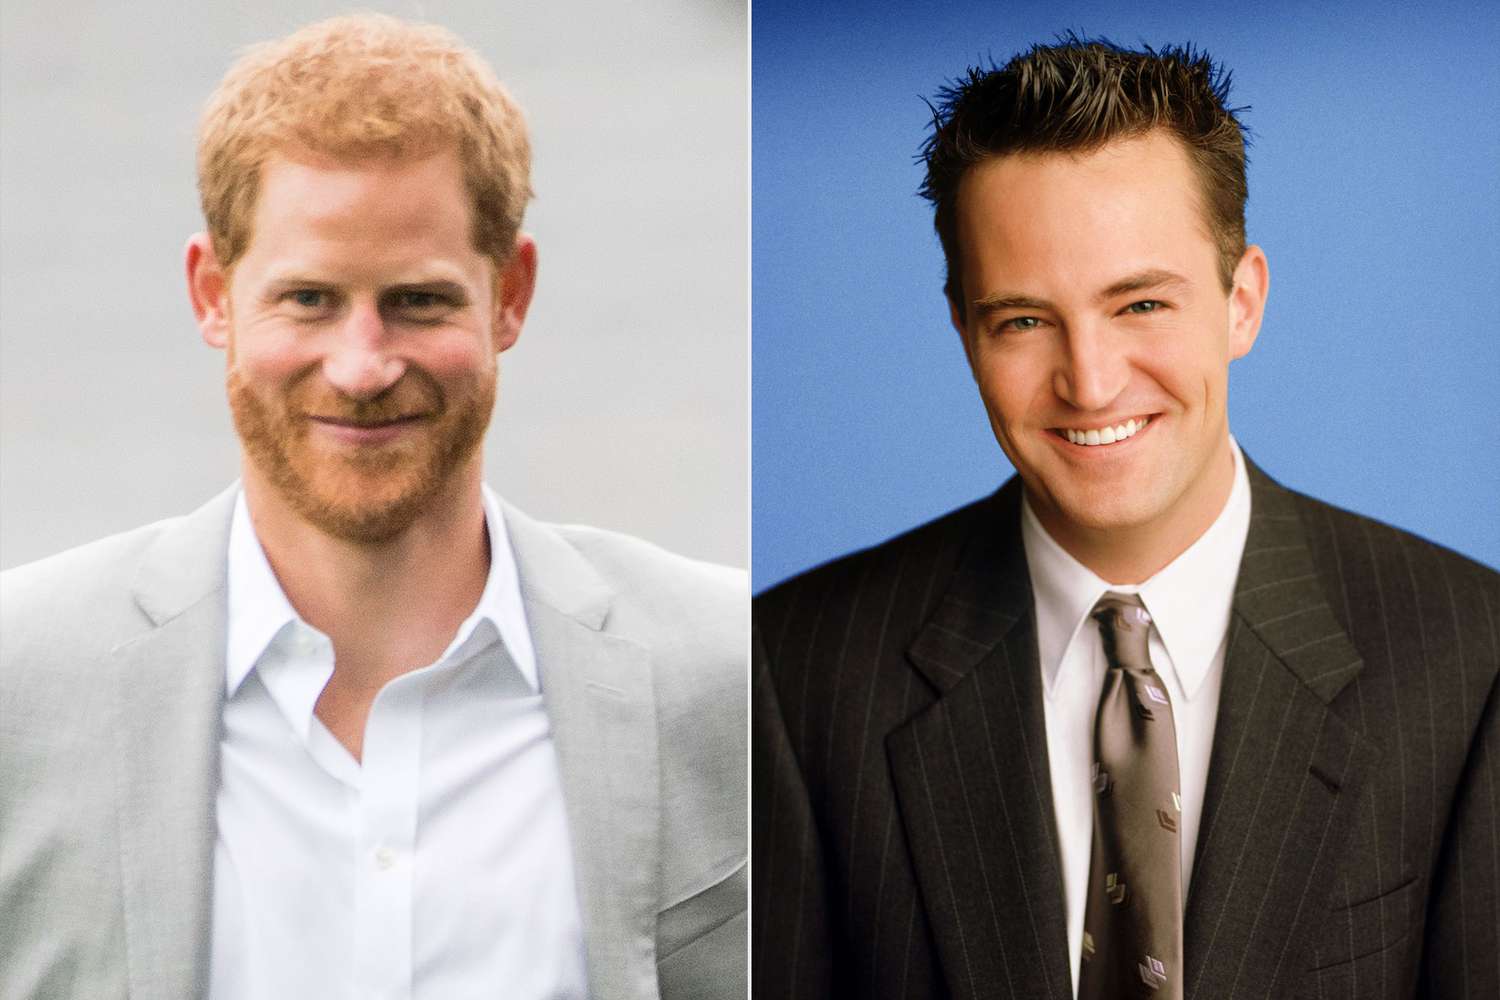 ‘Friends’ fanatic Prince Harry says he’s totally a Chandler